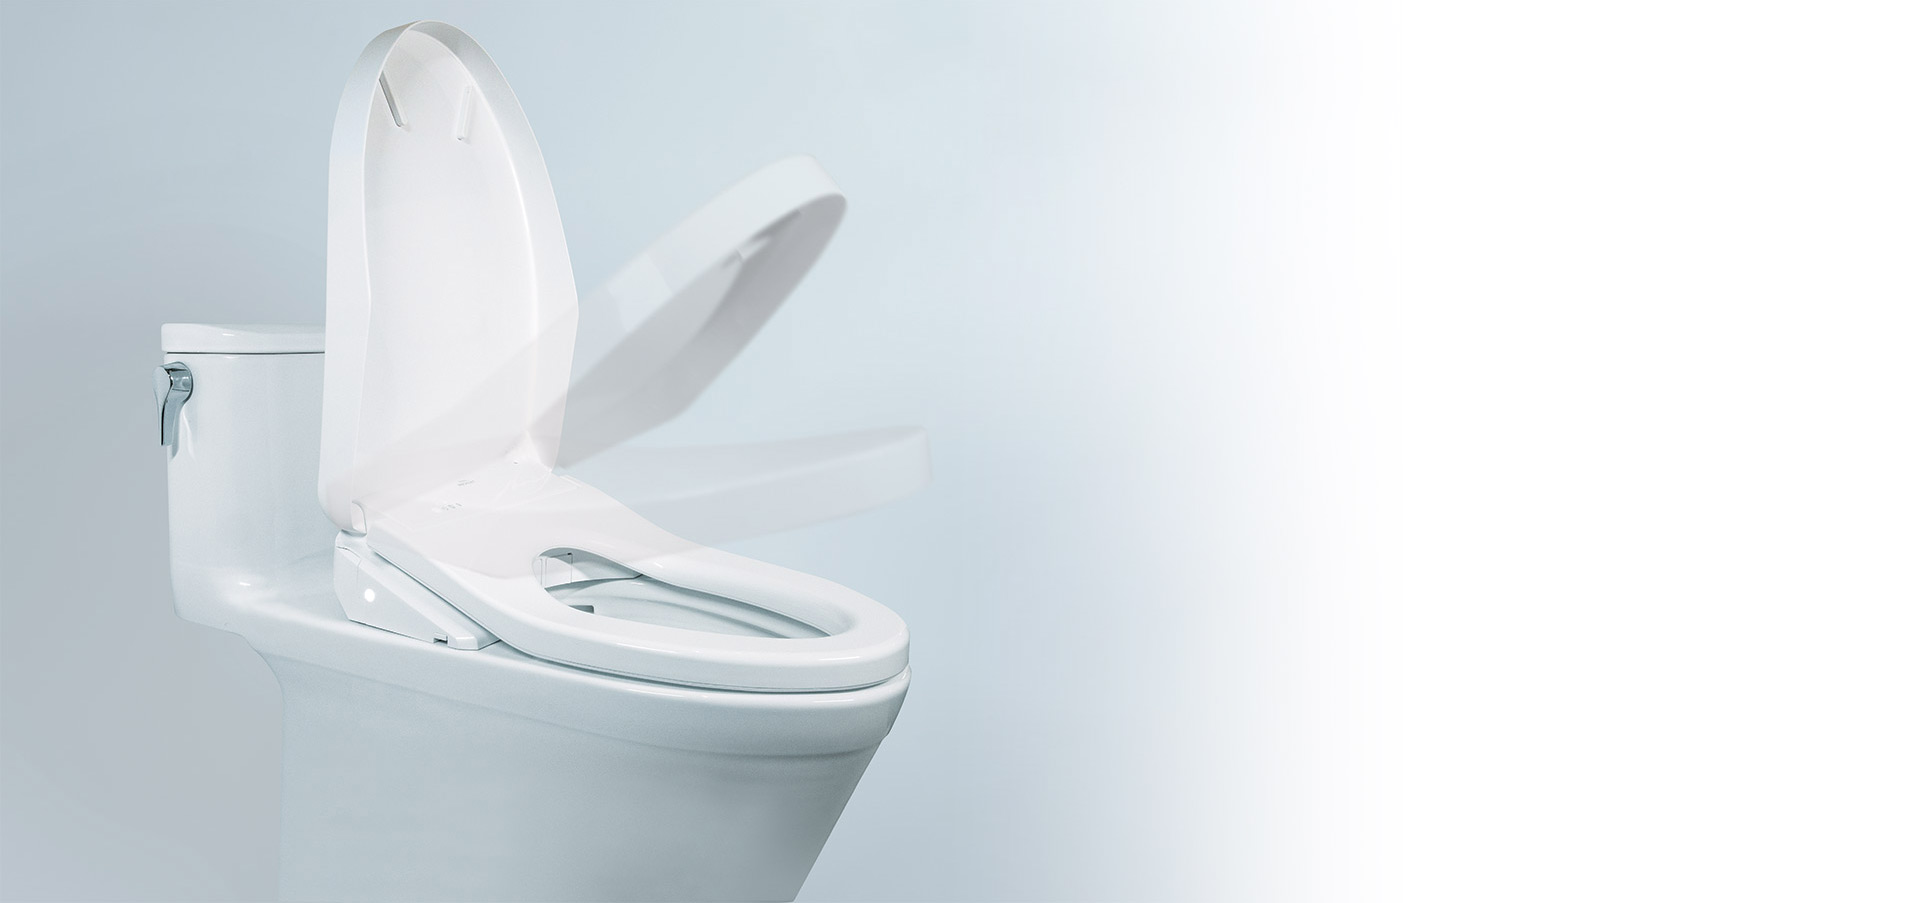 TOTO Toilet with WASHLET. Showing action of the SOFT CLOSE seat.